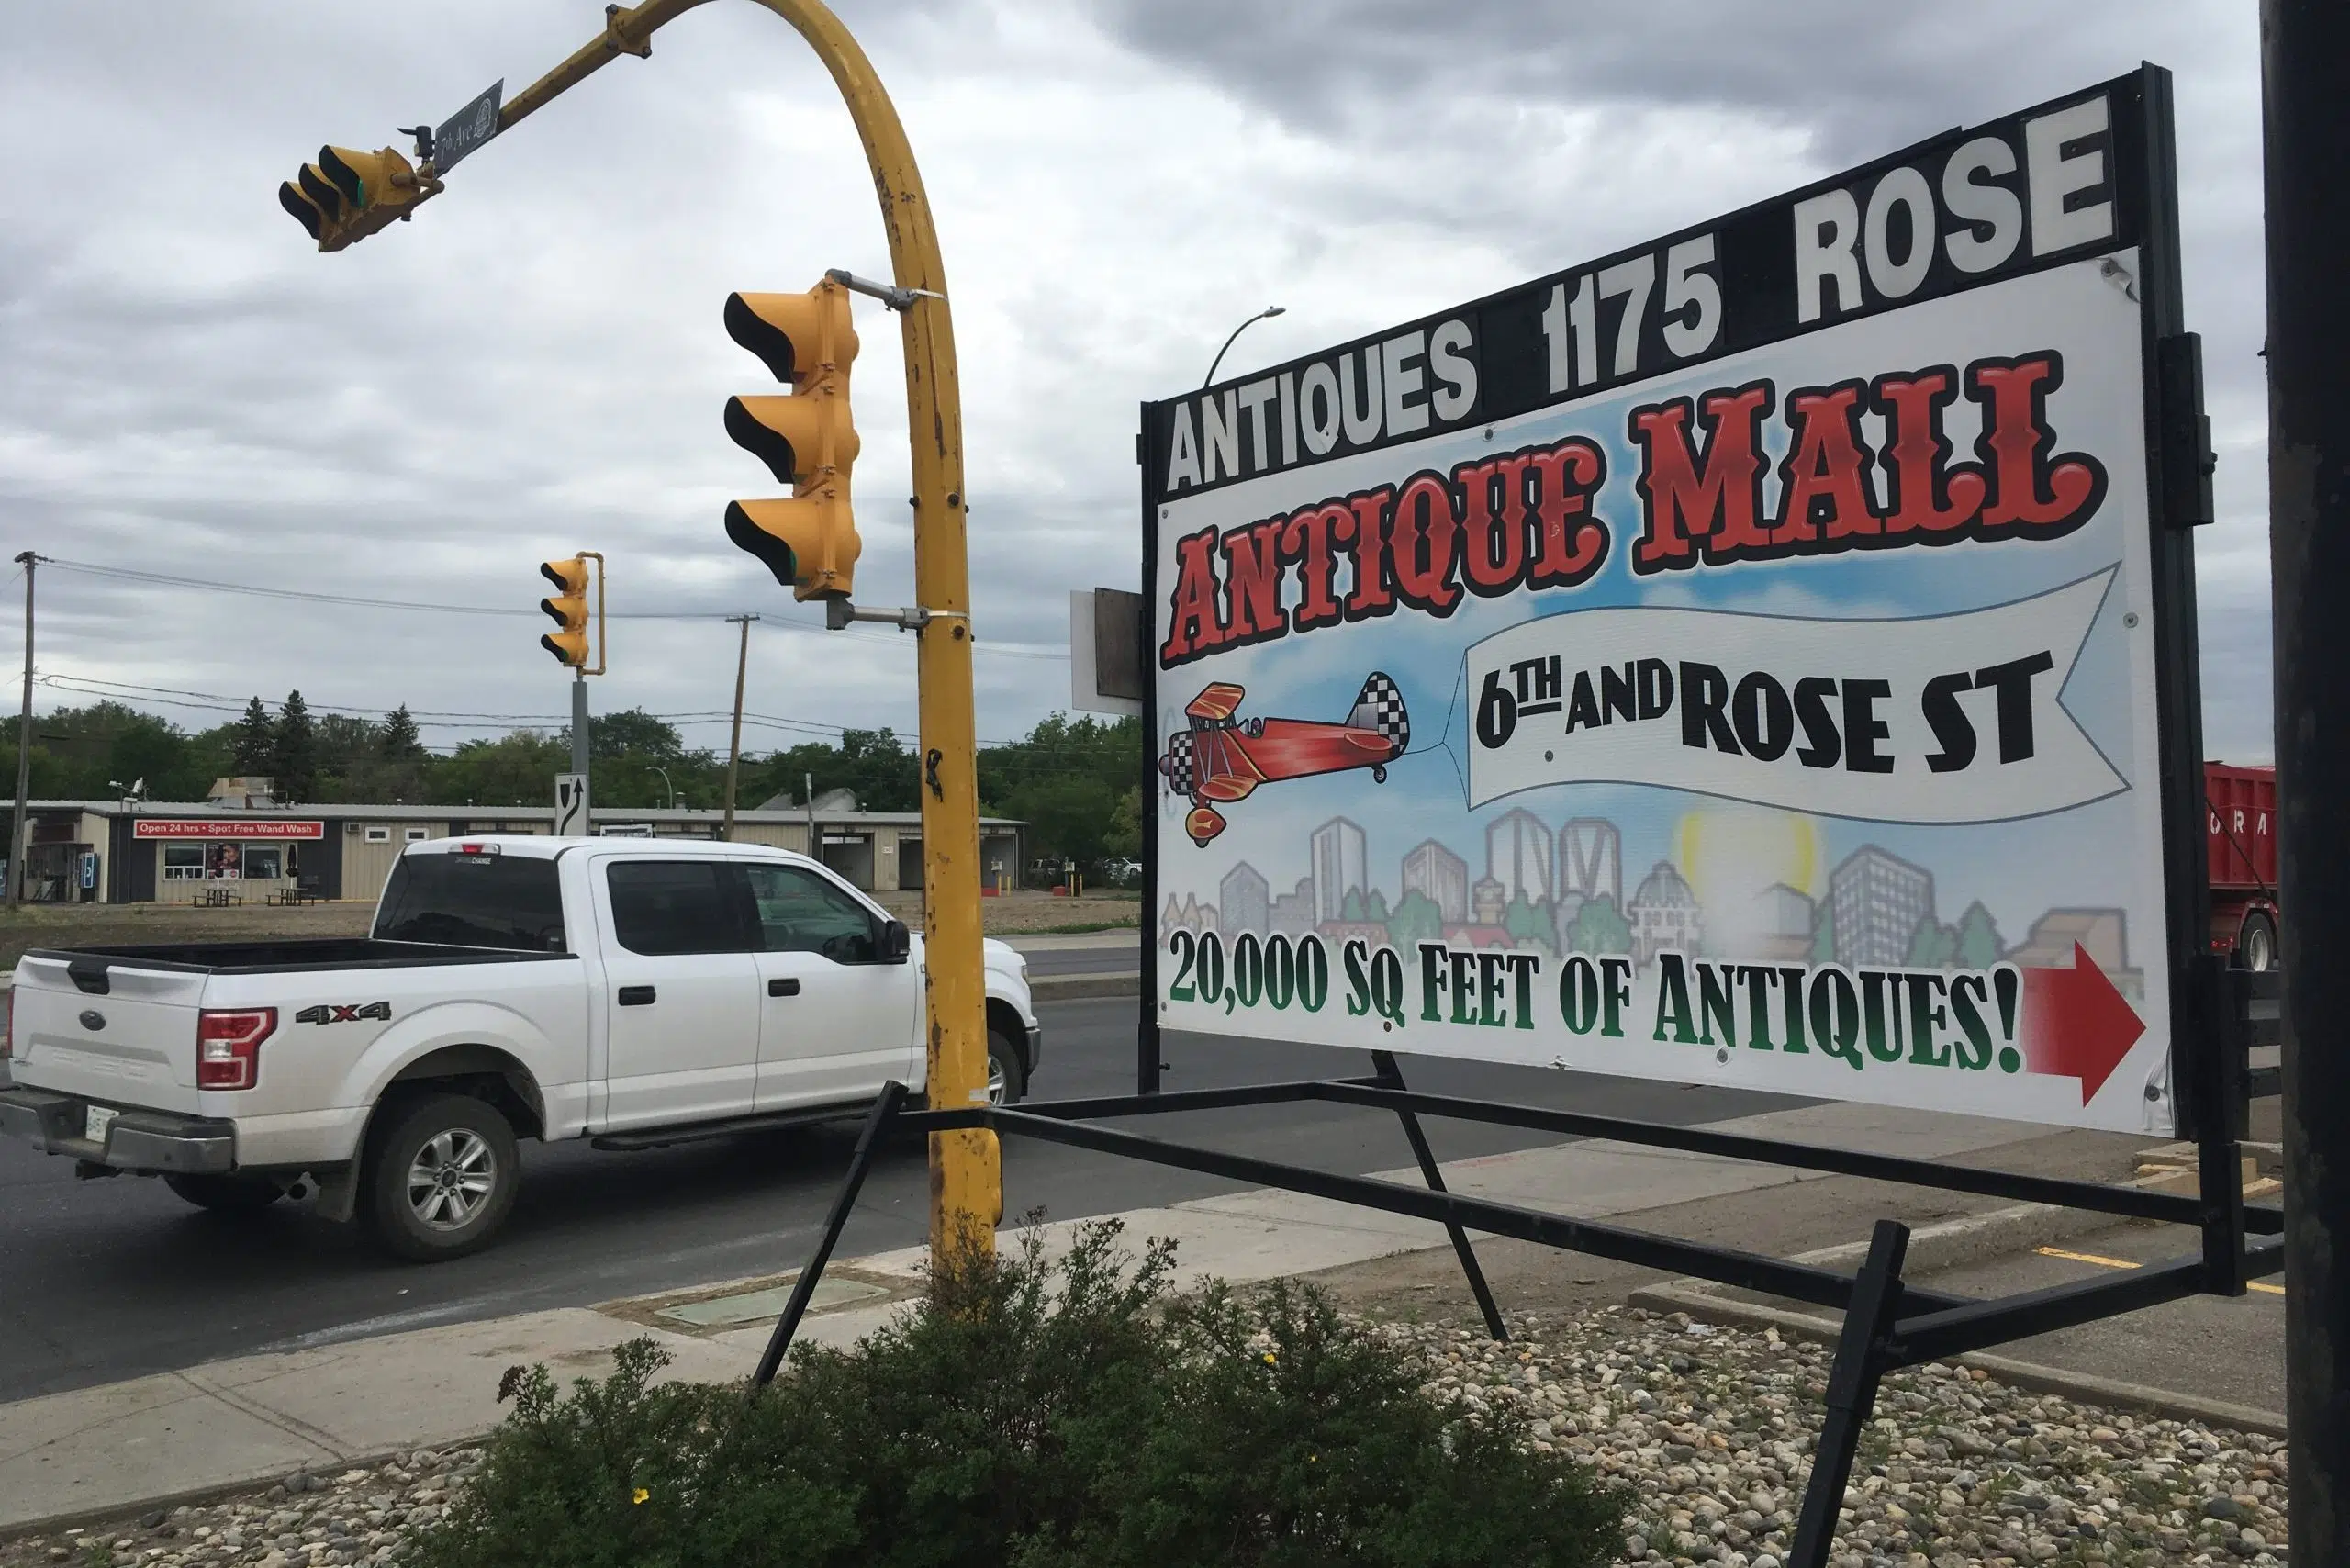 Proposed sign bylaw changes could hurt local business, says advocate